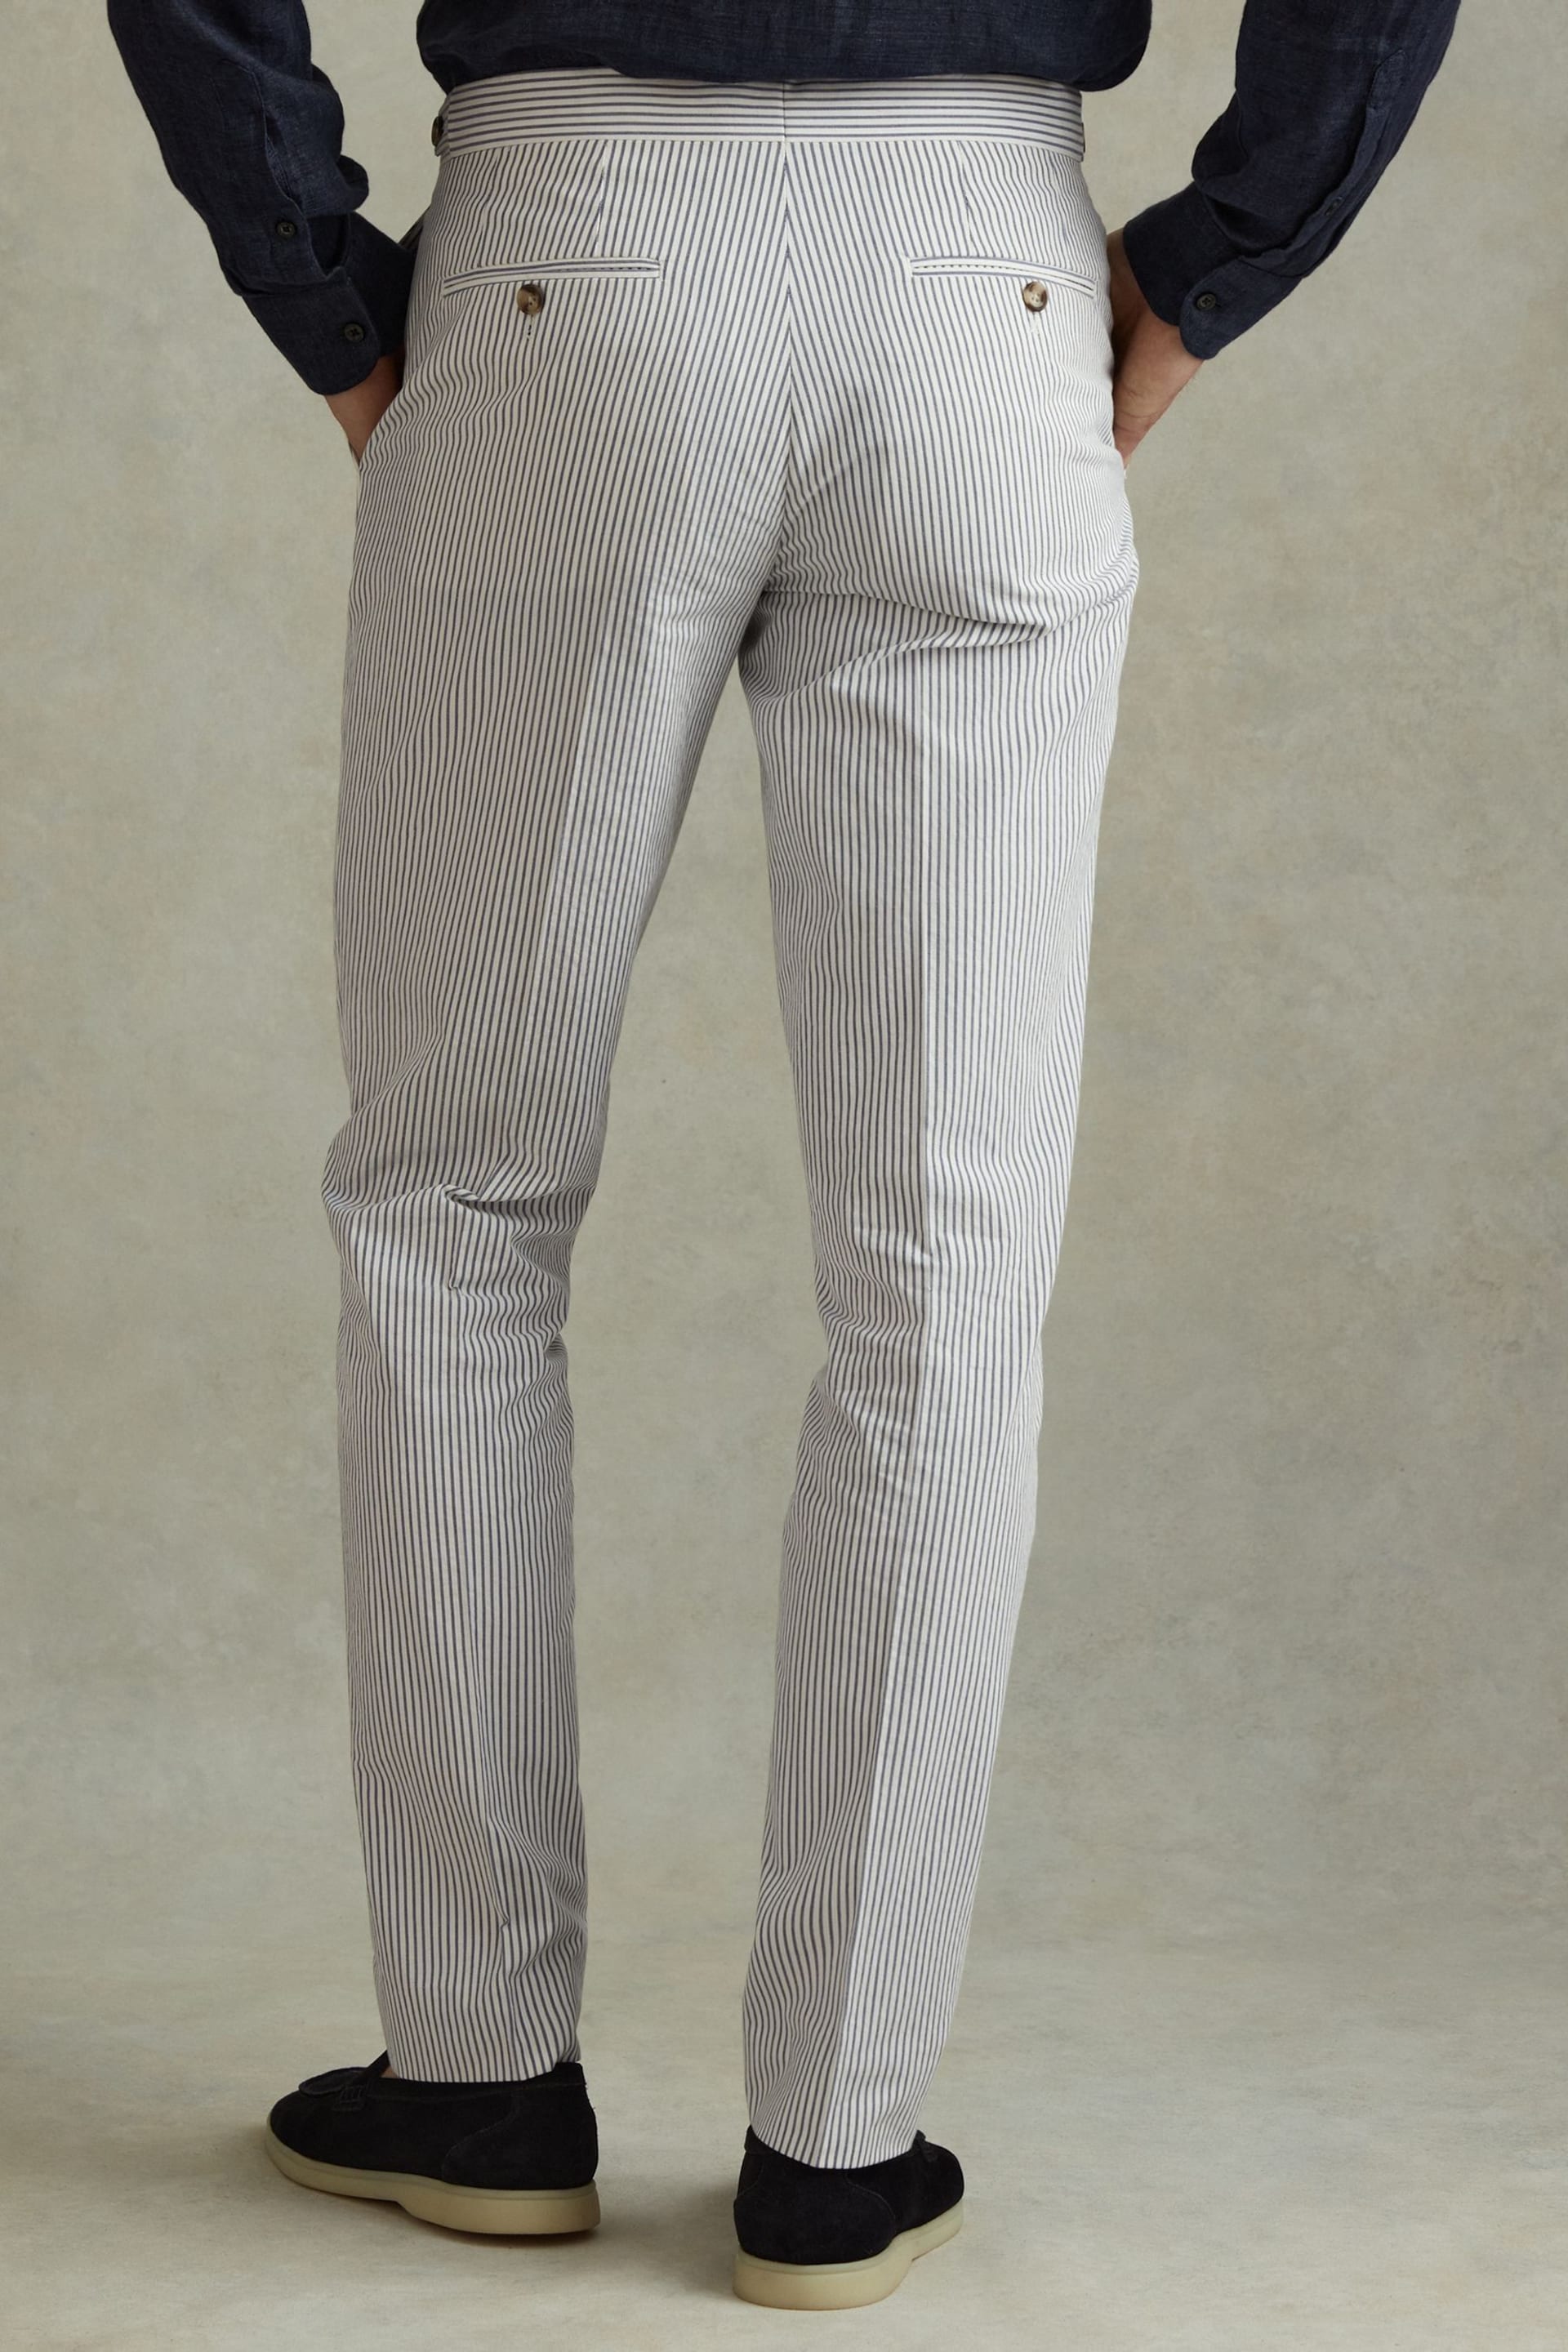 Reiss Soft Blue/White Barr Cotton Seersucker Adjuster Trousers - Image 4 of 5